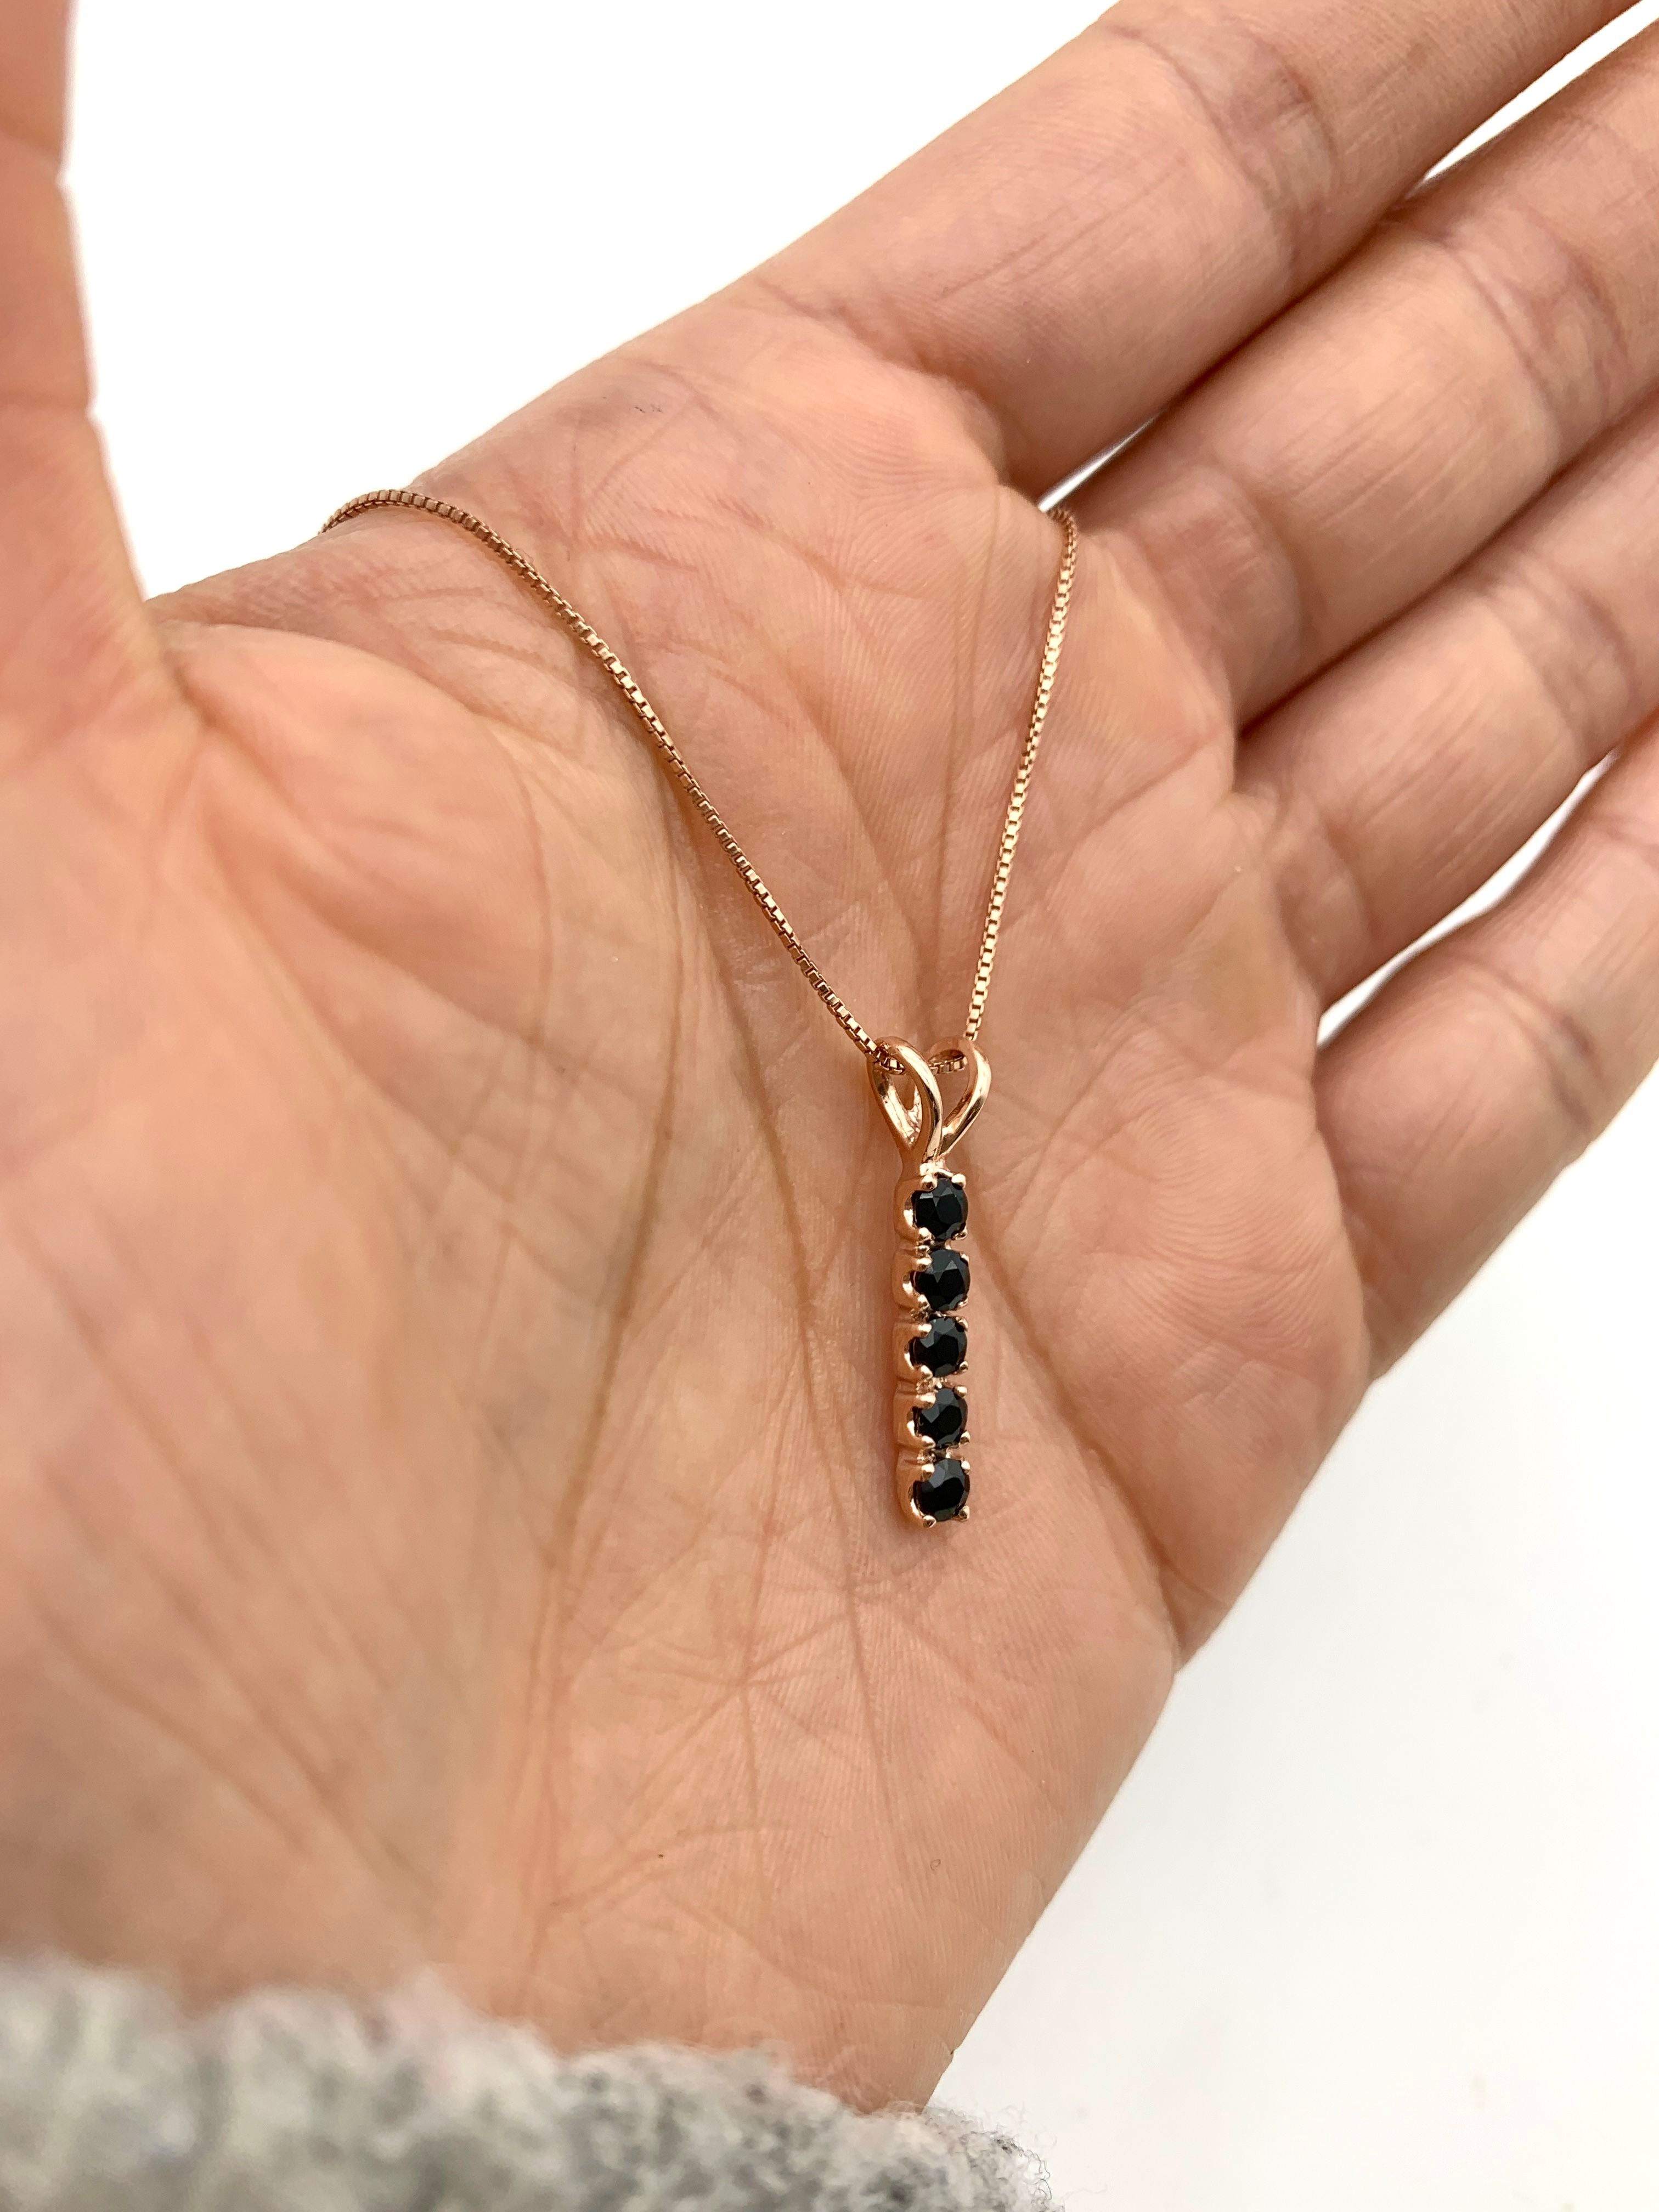 Vertical Onyx Necklace - Rose Gold Onyx Necklace - Natural Onyx Pendant